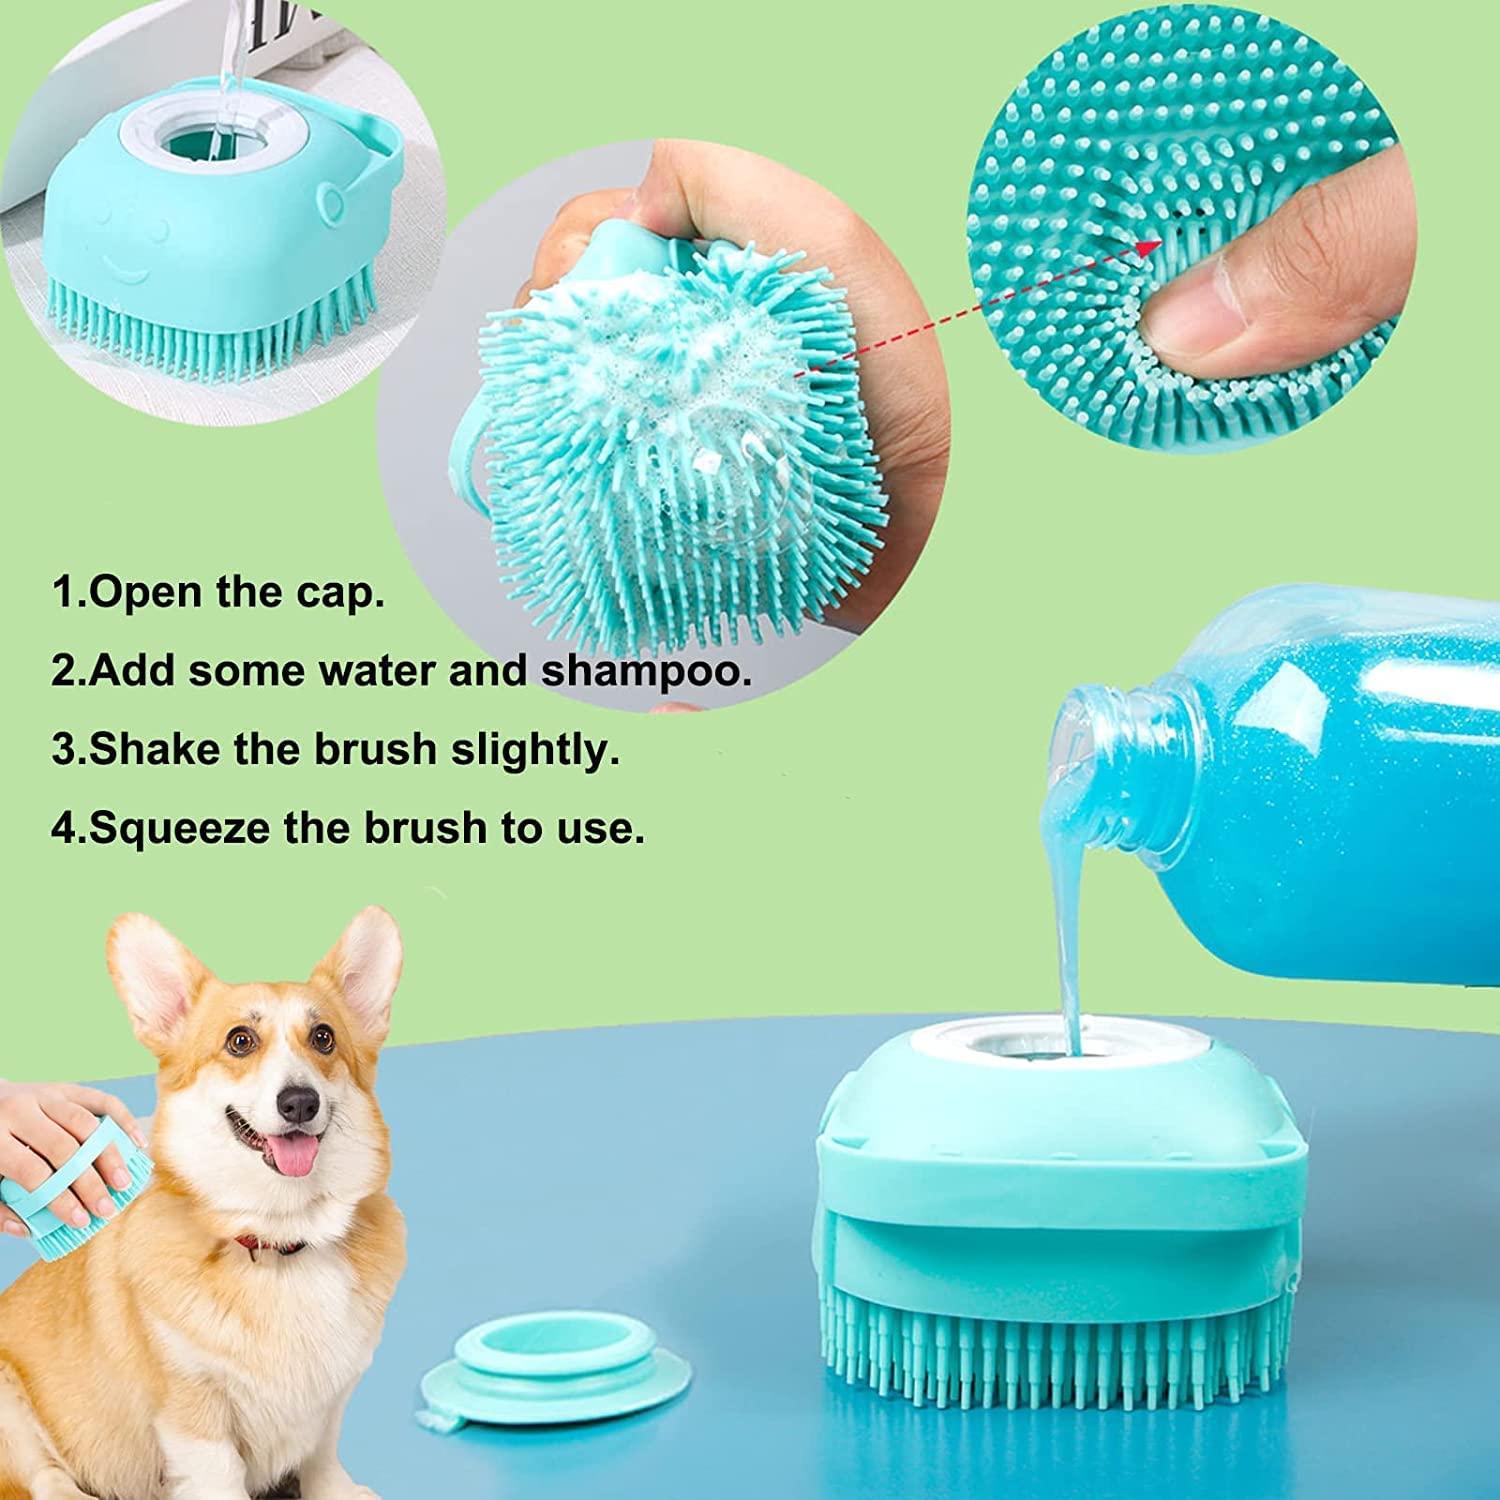 Dog Bath Brush - Body Scrubber with Soft Silicone Brushes for Grooming